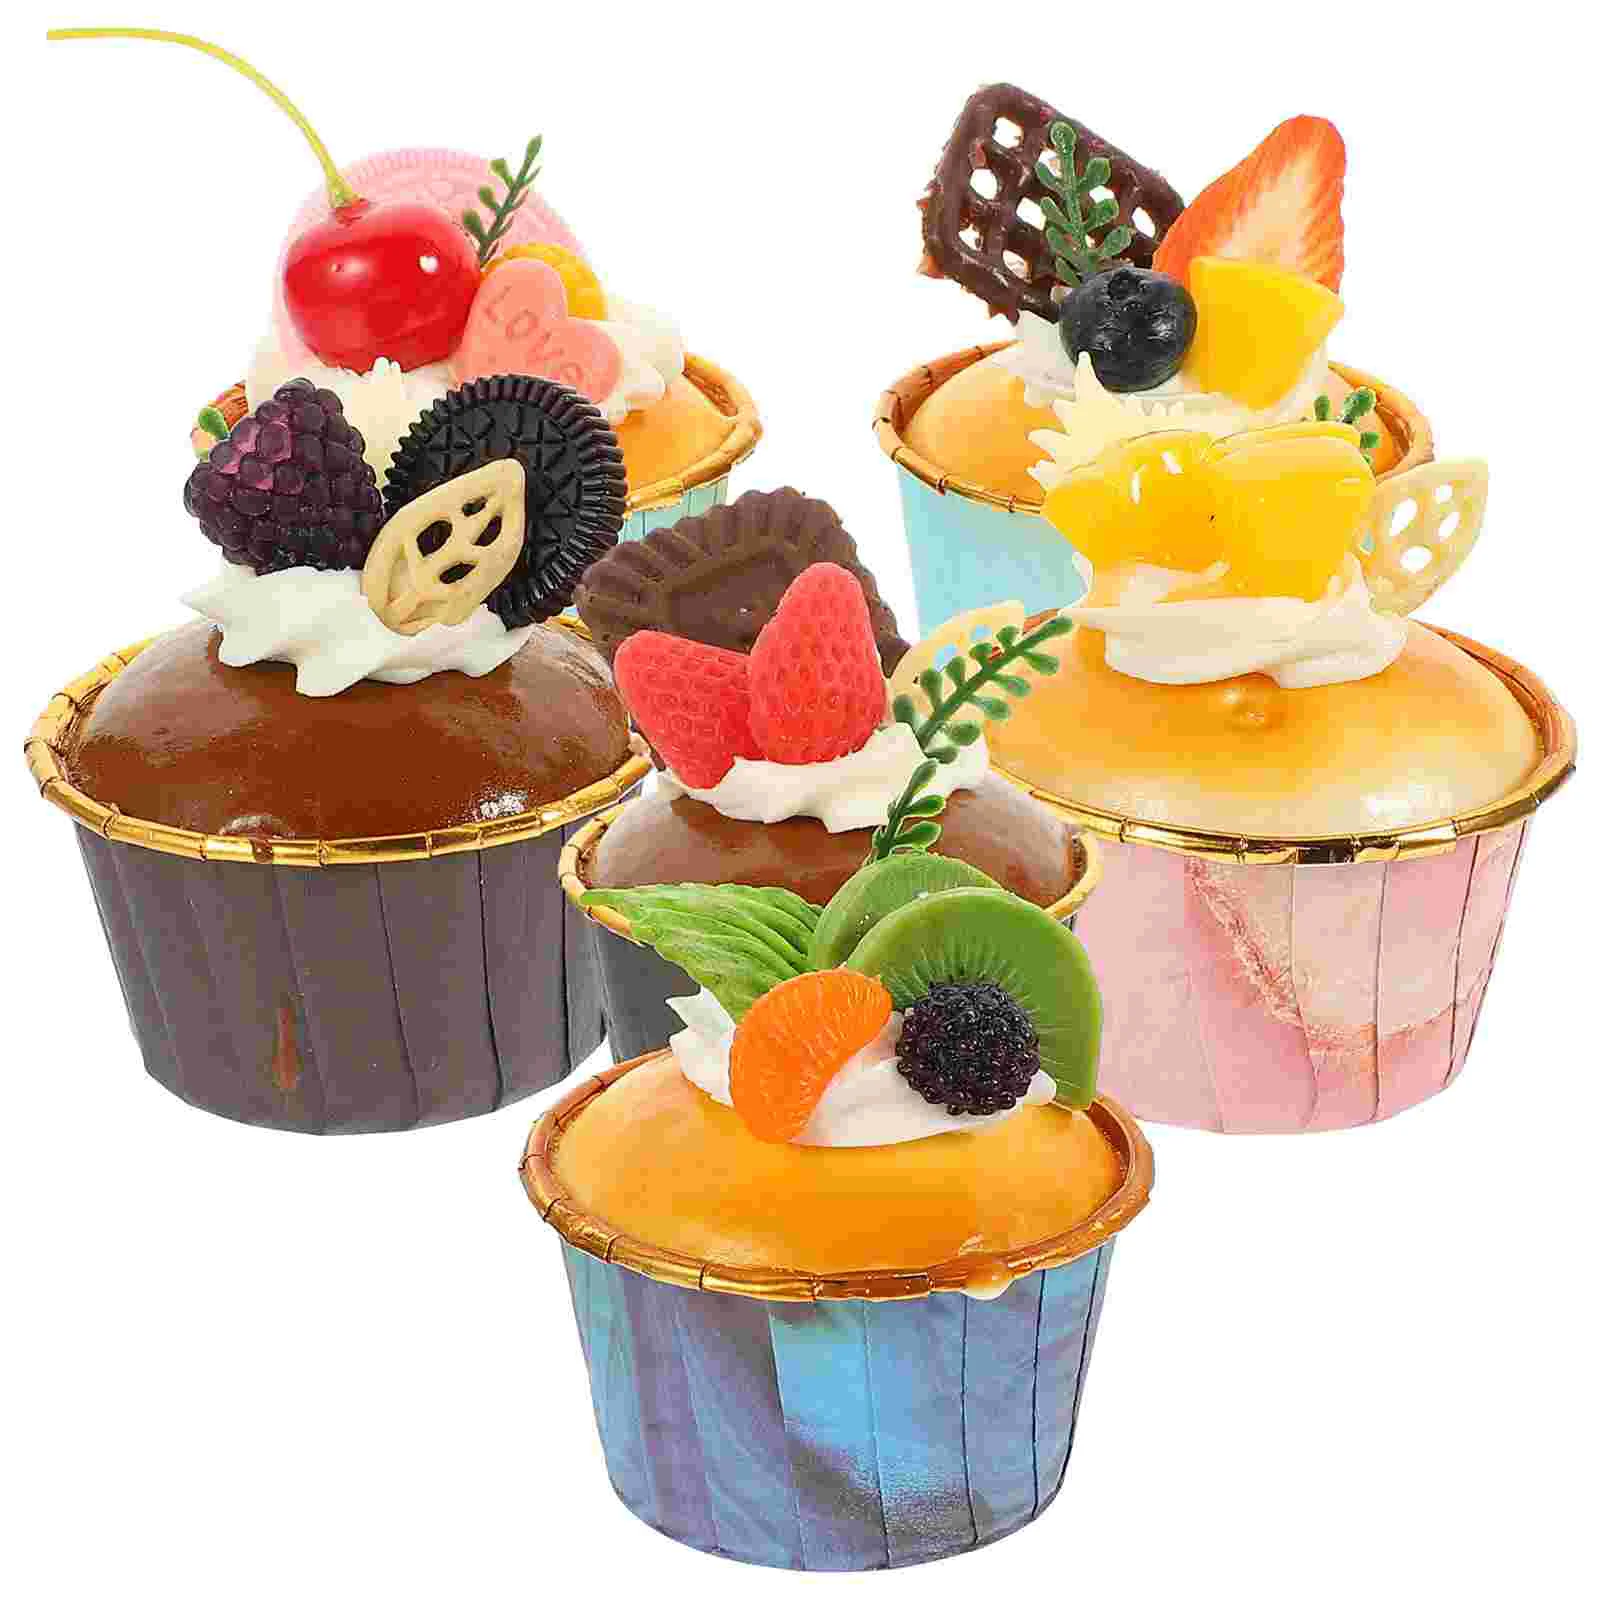 

6 Pcs Simulated Food Cake Model Slice Models Artificial Home Decors Accents Simulation Cakes Tabletop Delicate Dessert Lovely